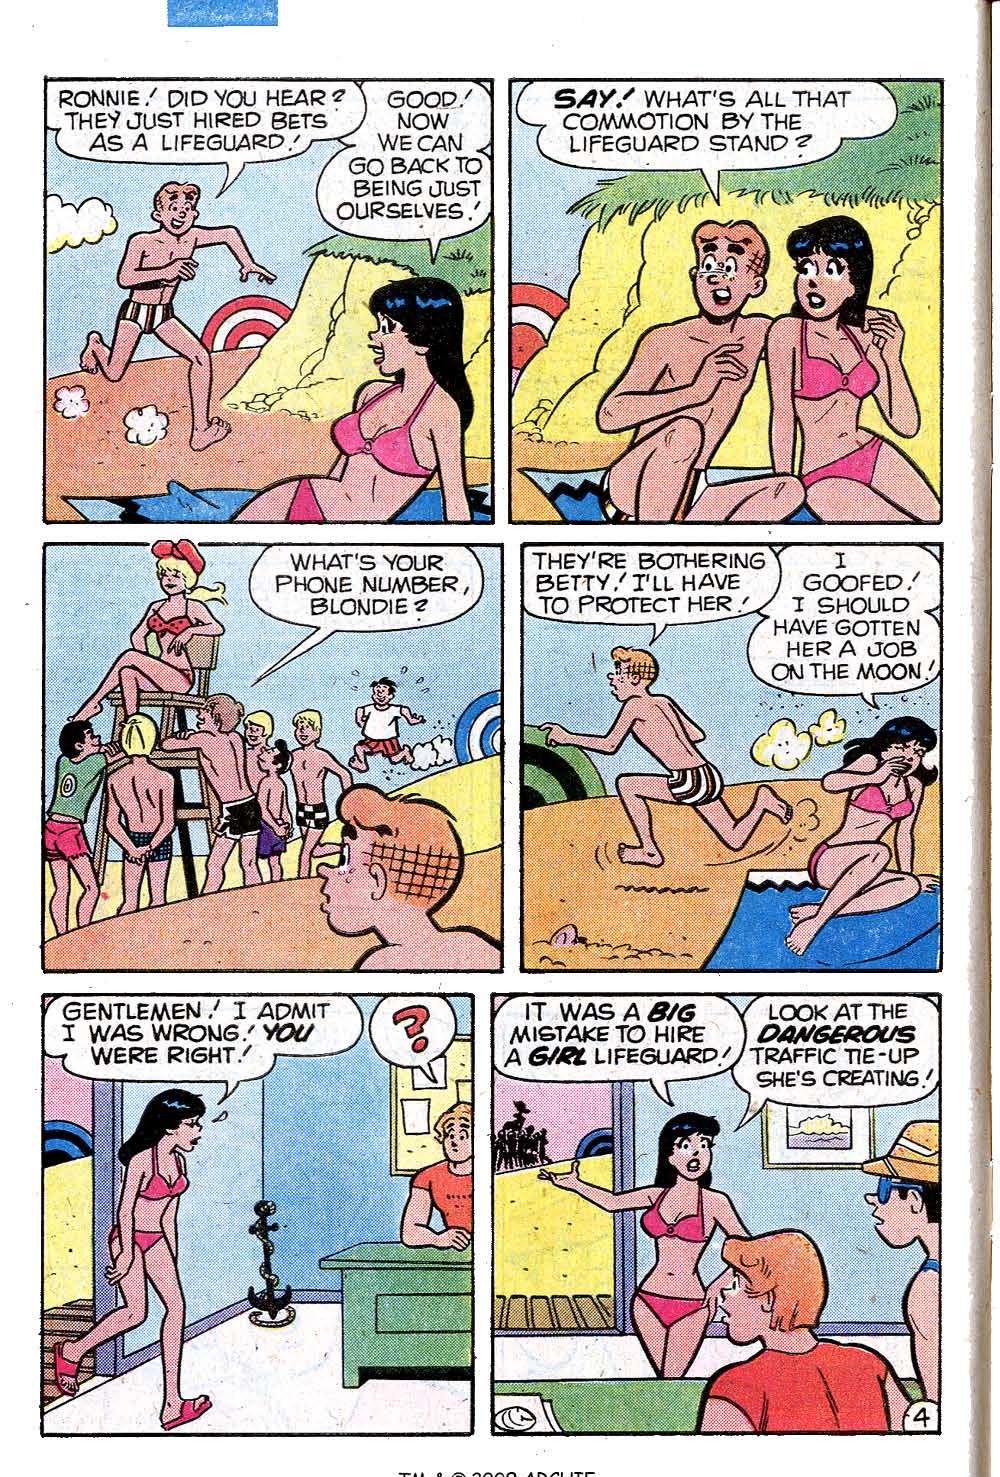 Read online Archie's Girls Betty and Veronica comic -  Issue #286 - 6